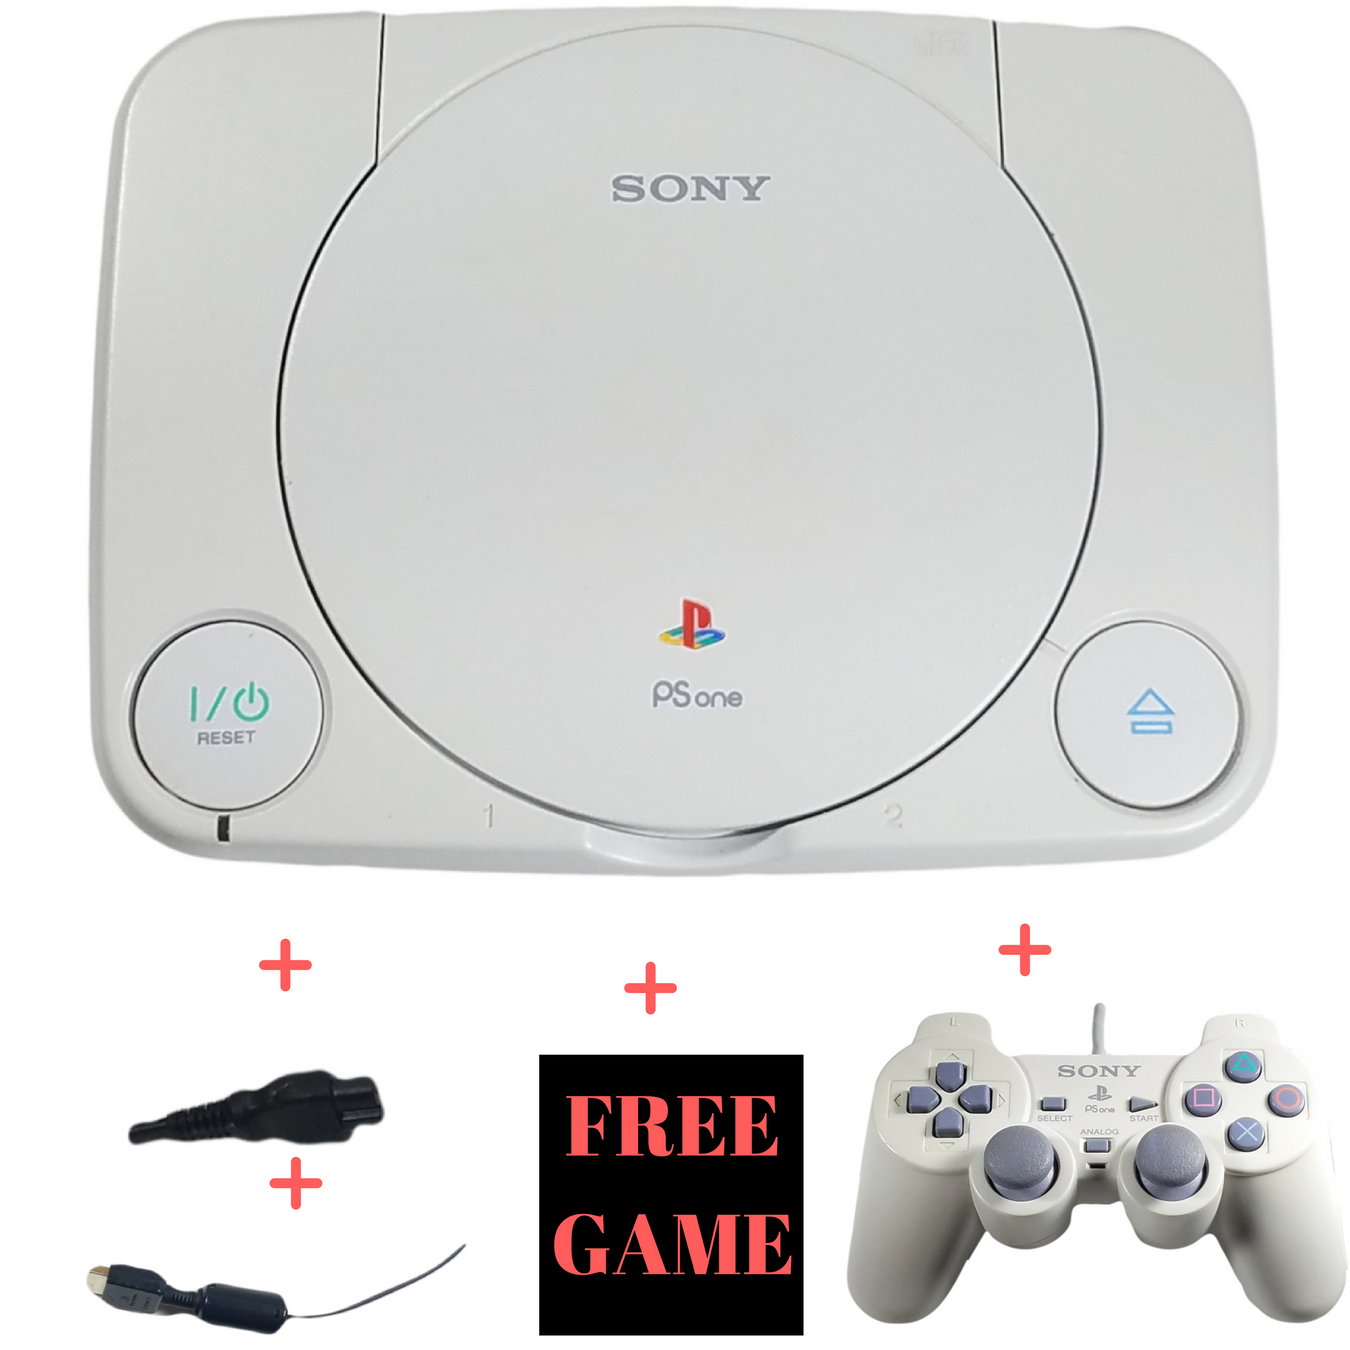 PlayStation 1 Consoles